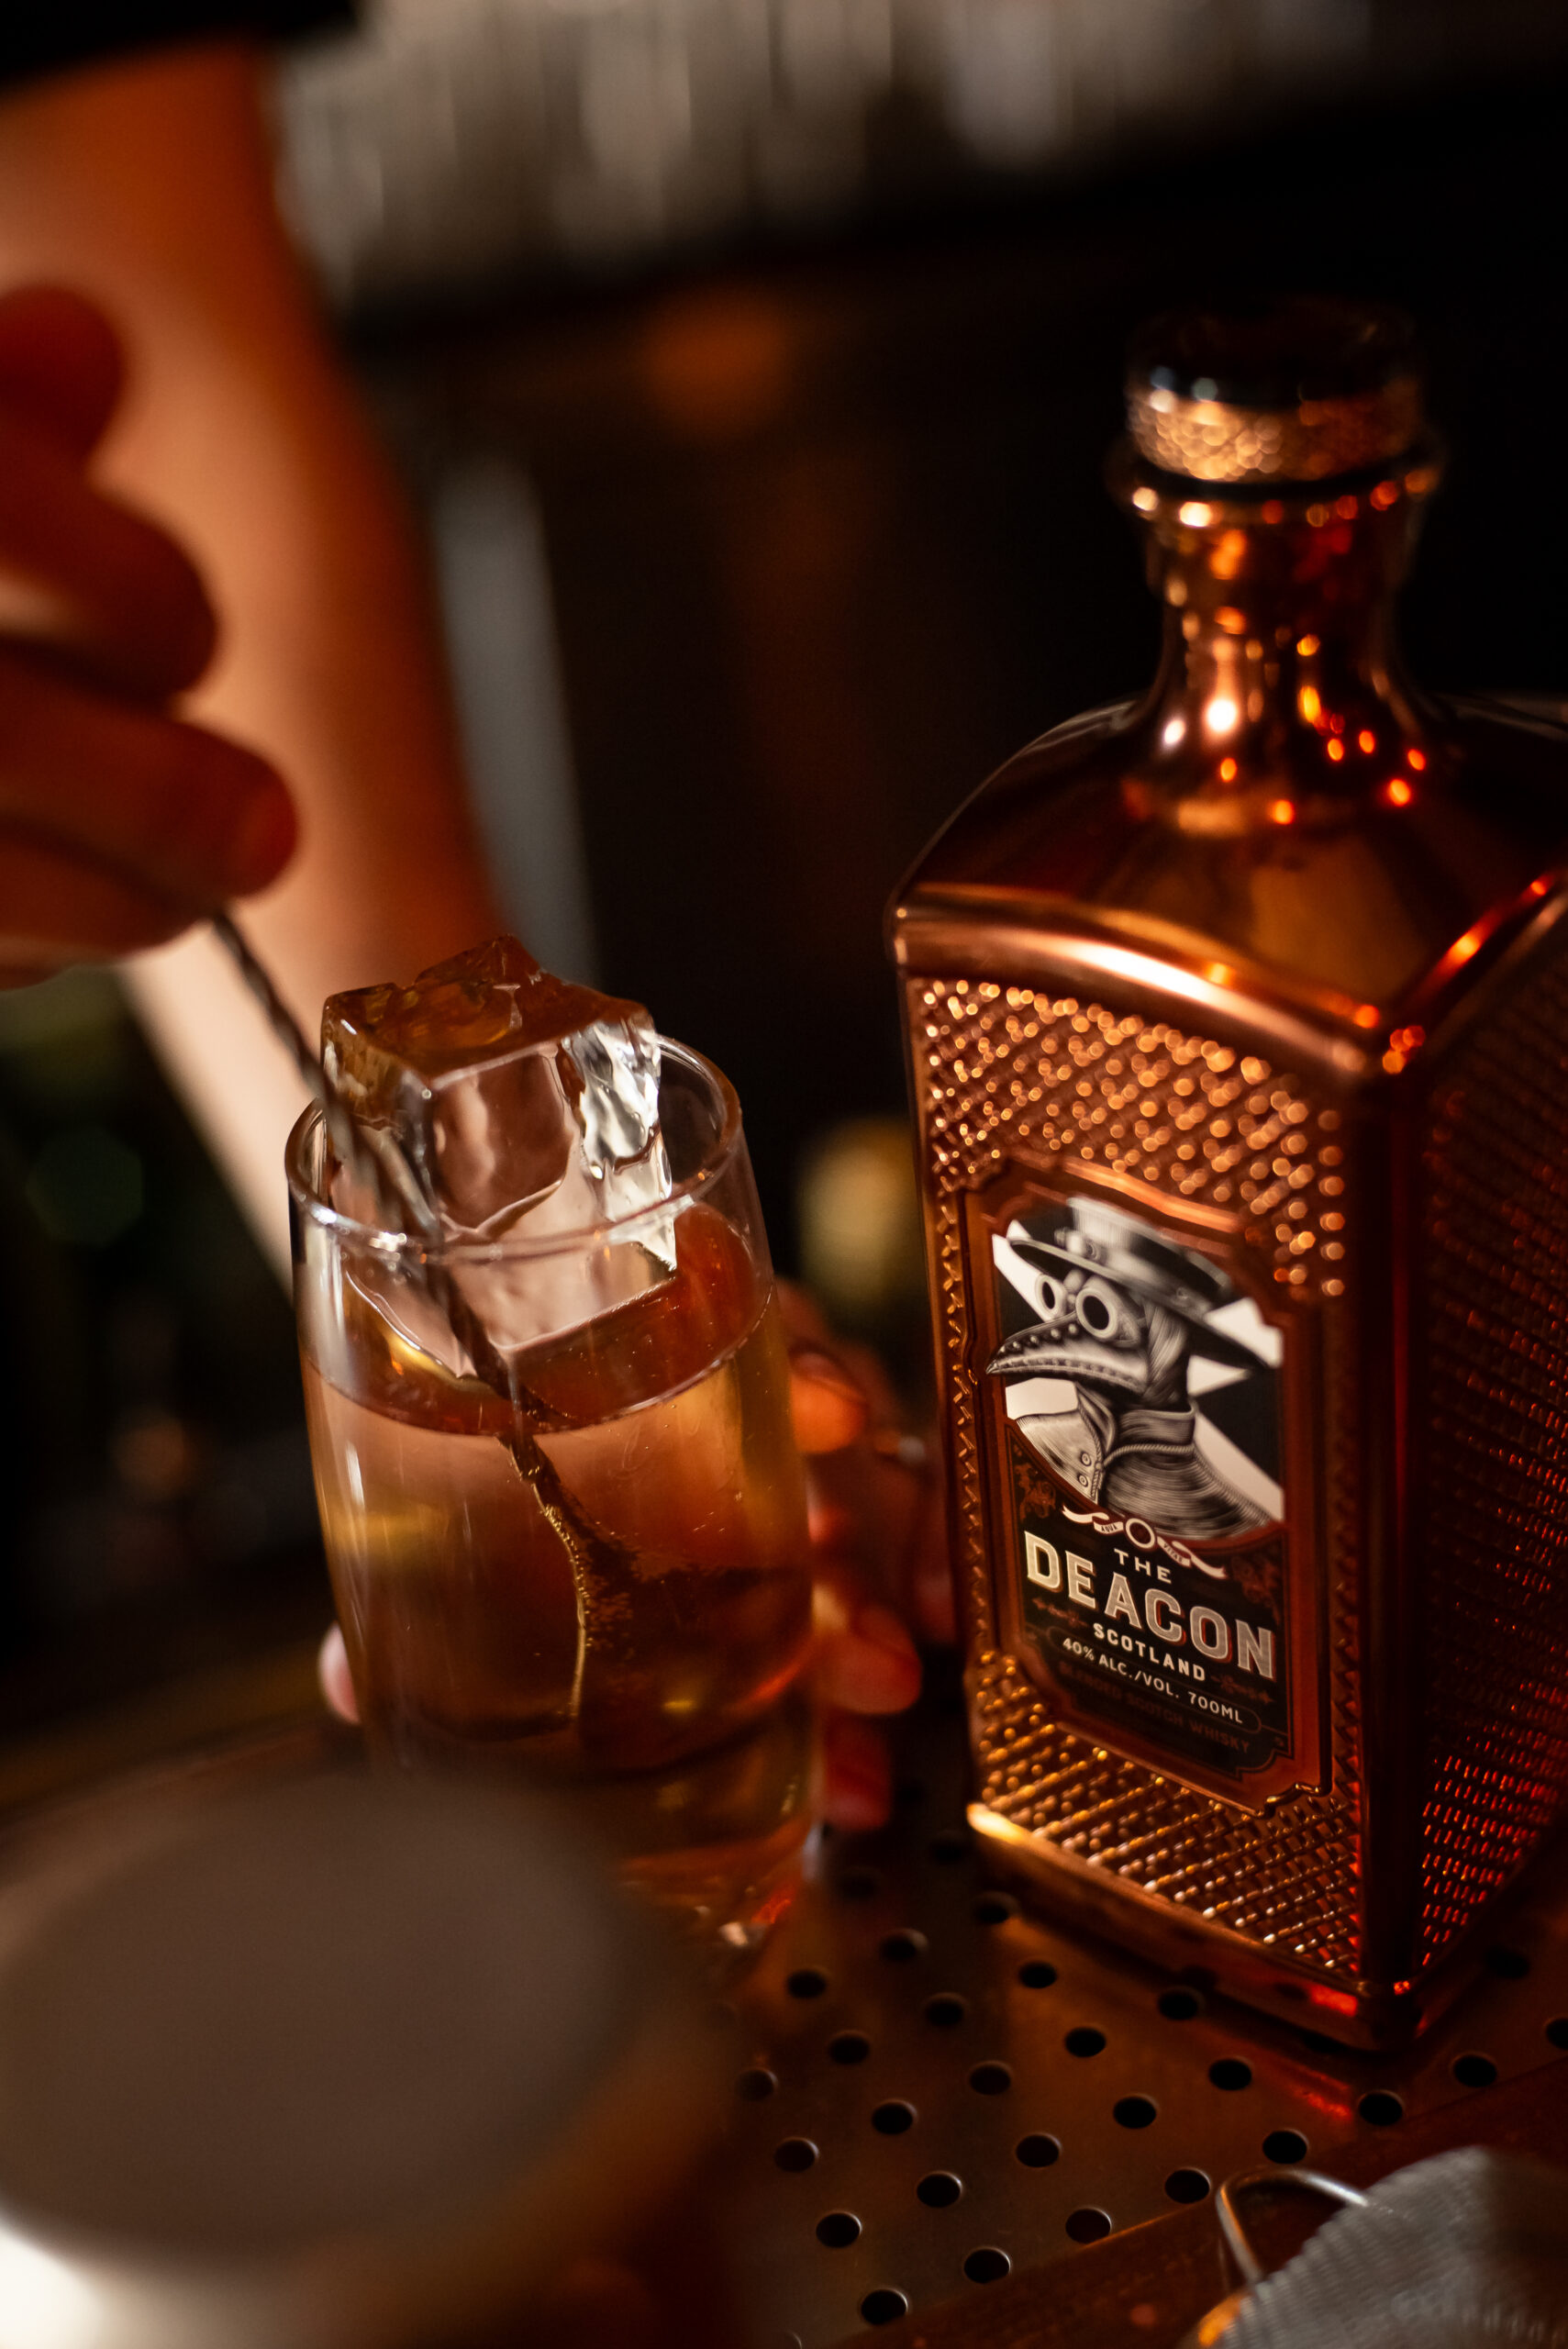 The deacon launch at skullduggery mixing drink